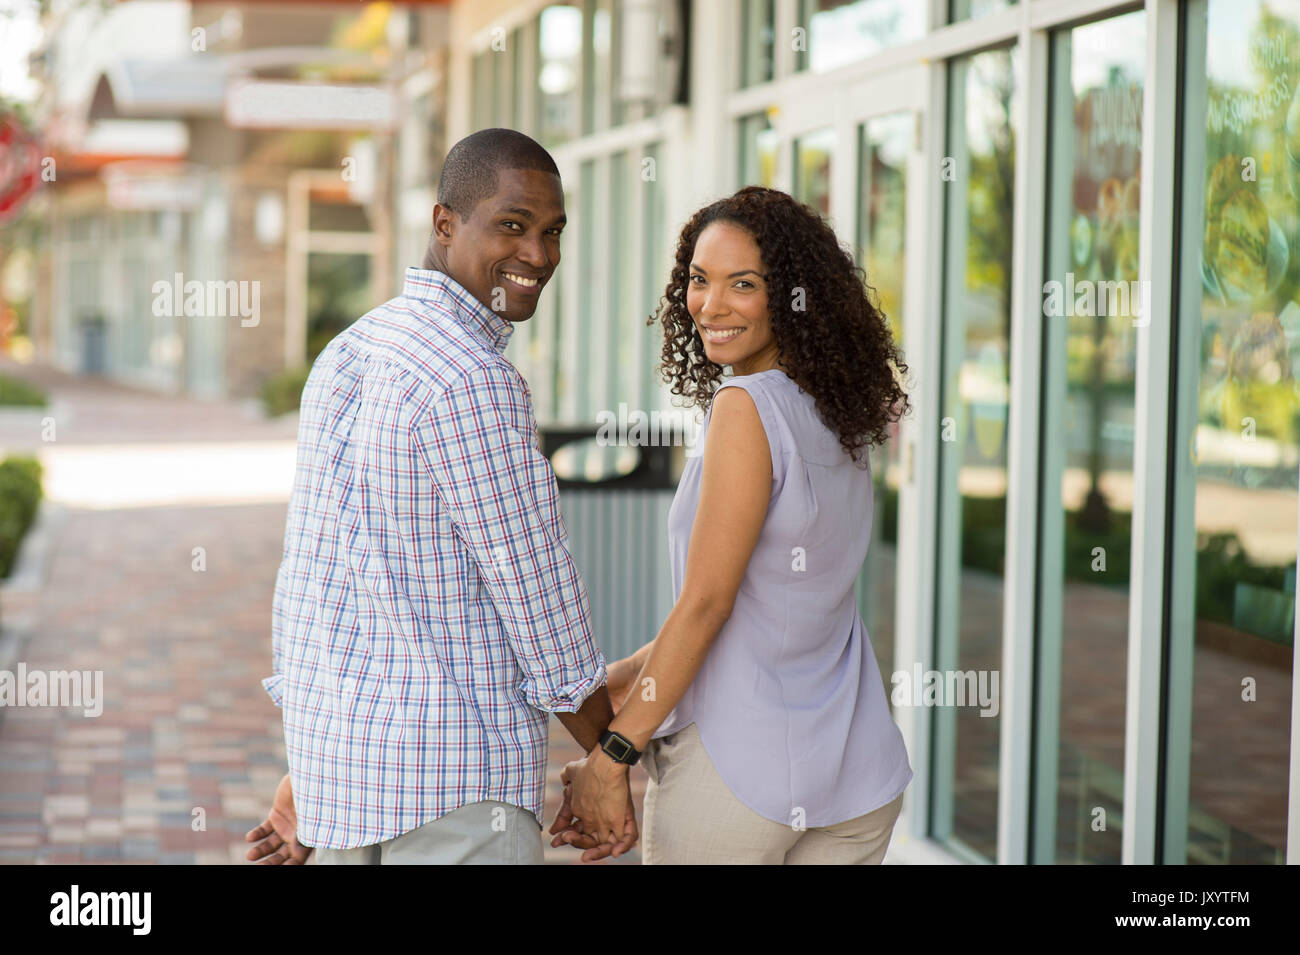 Portrait of smiling couple holding hands and looking at camera Stock Photo